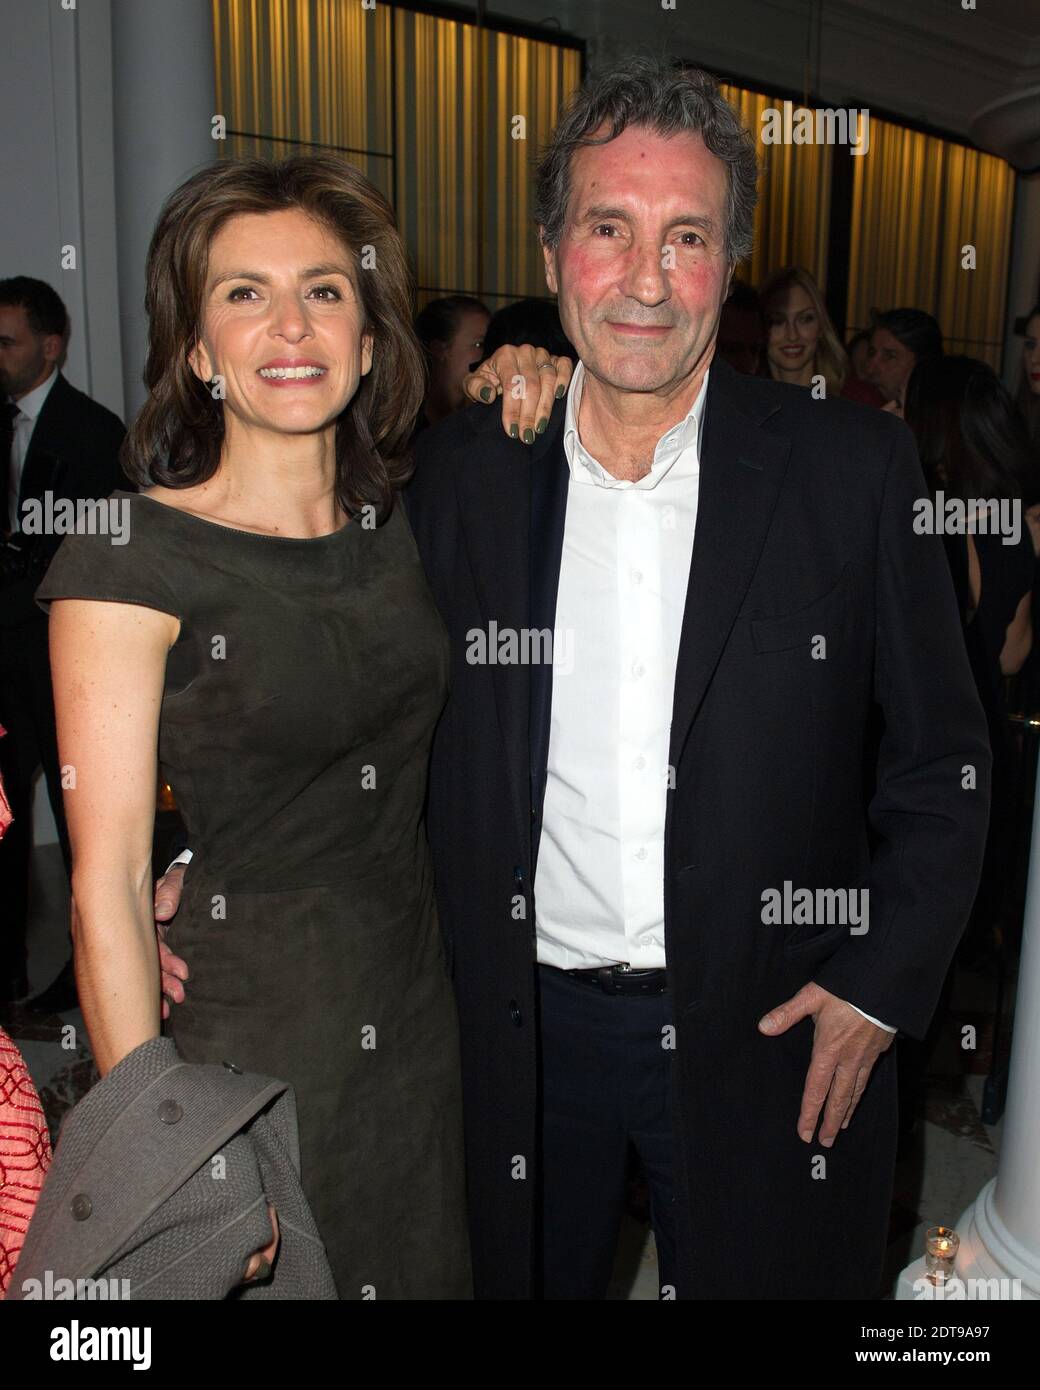 Jean-Jacques Bourdin and his wife Anne Nivat attending the Neo Burlesque  party held at Hotel Vernet in Paris, France on March 20, 2014. Photo by  Laurent Zabulon/ABACAPRESS.COM Stock Photo - Alamy